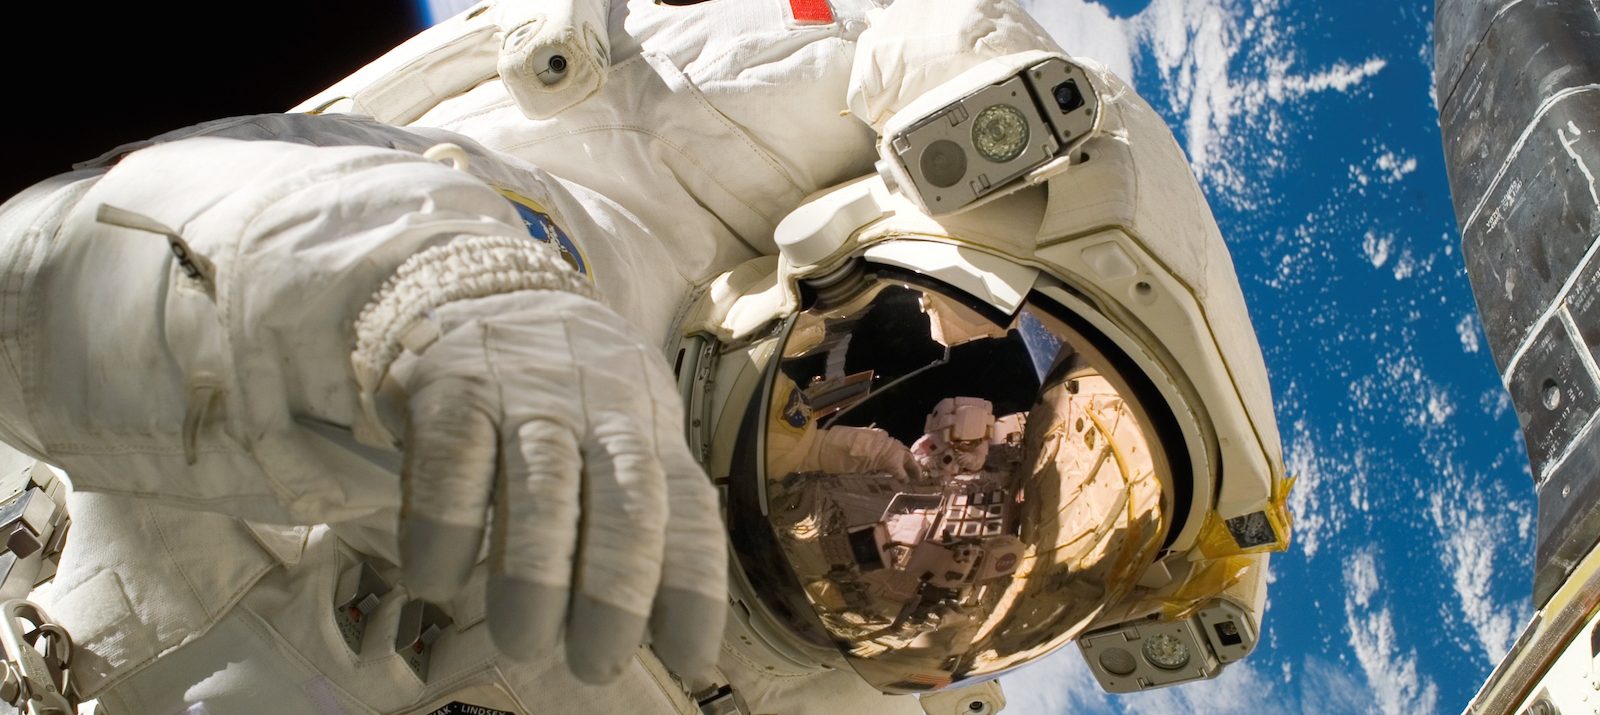 how to live in small spaces: channel your inner astronaut piers sellers spacewalk